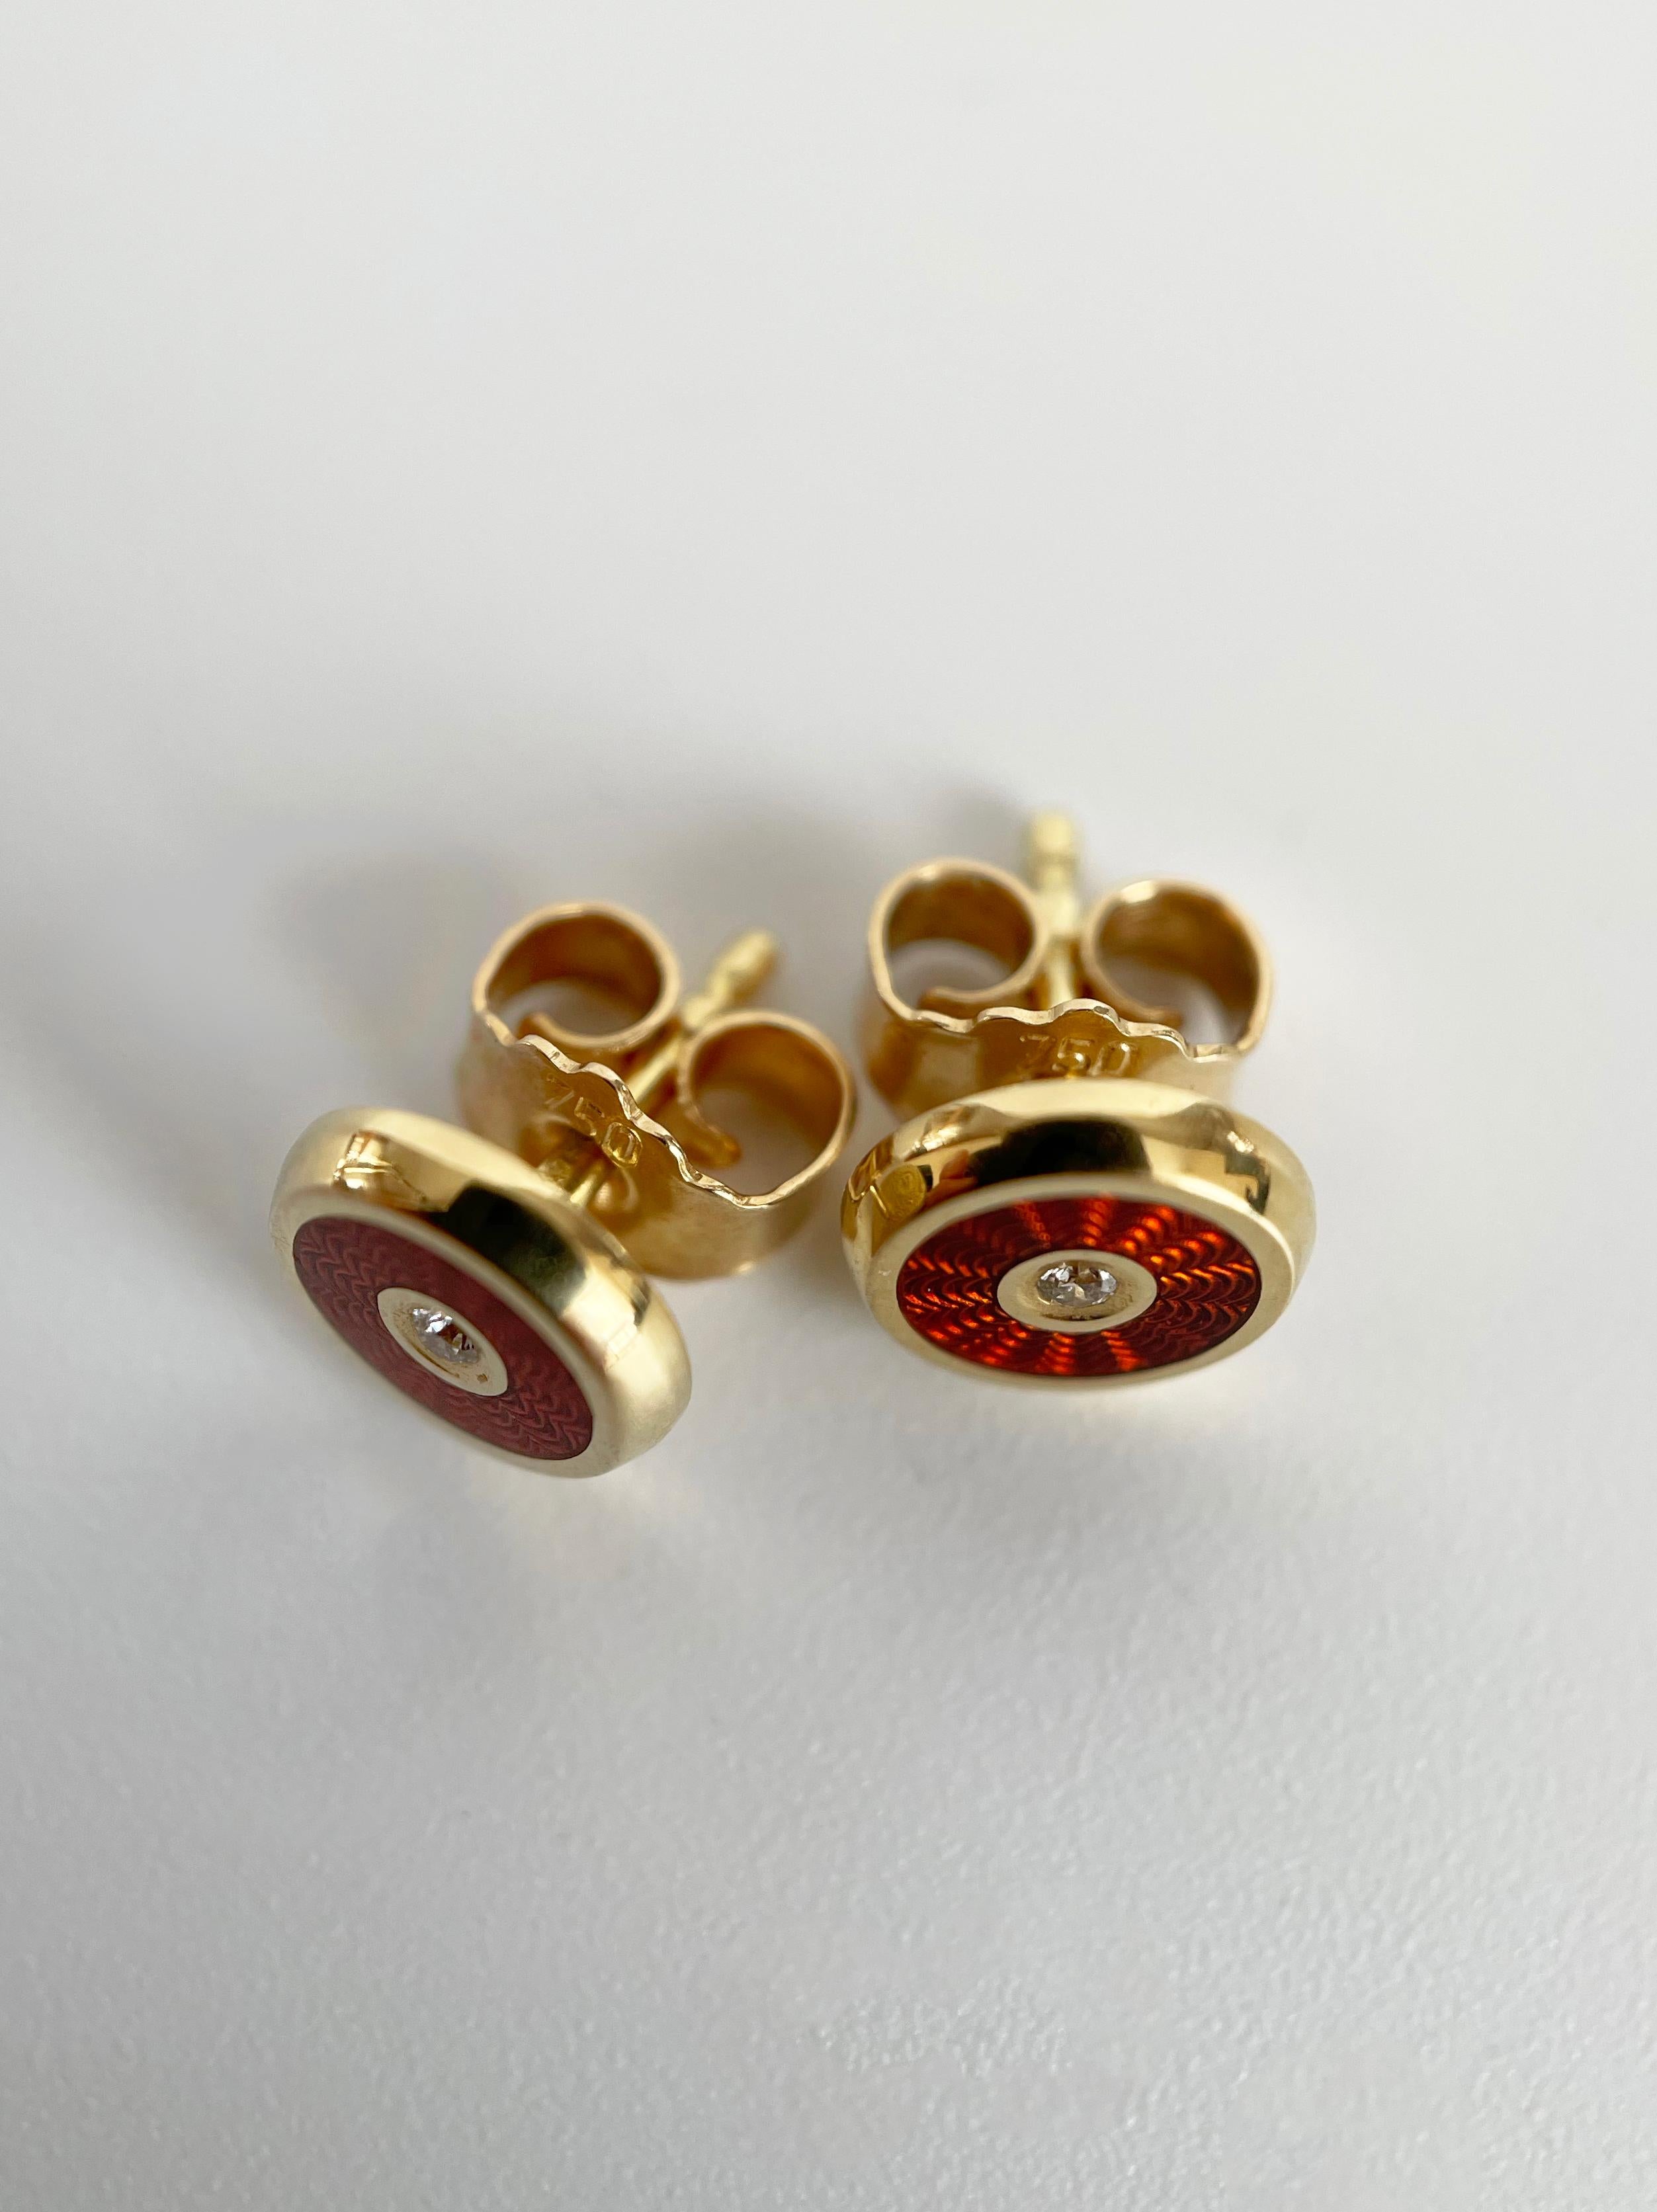 18-Karat Gold Earrings and Pendant Set “Harmony” with Diamonds and Red Enamel For Sale 3